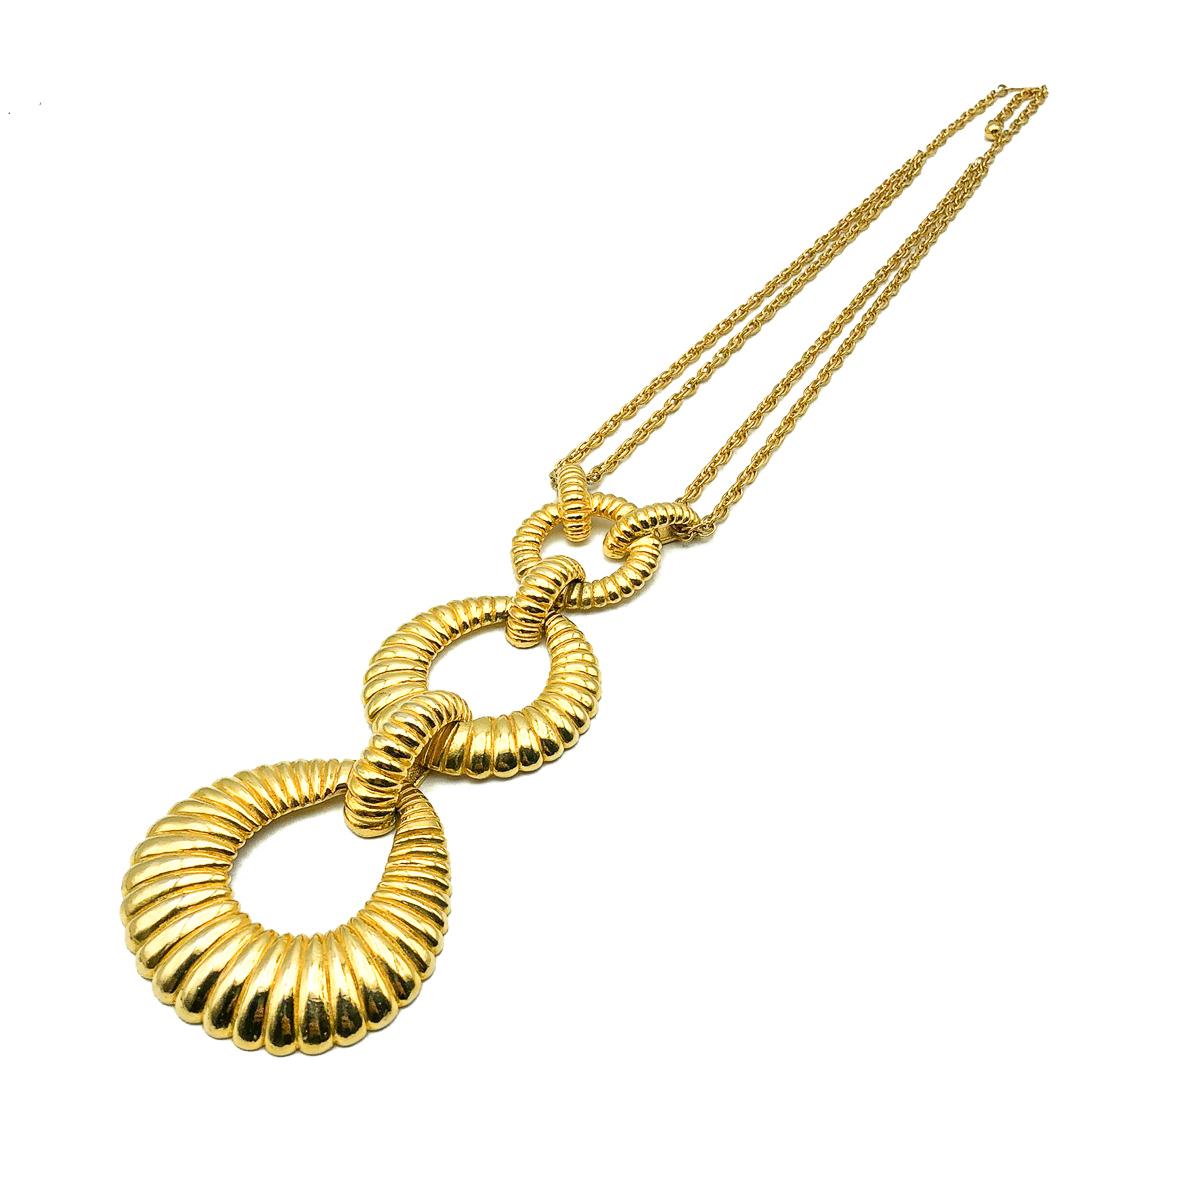 A totally rocking vintage triple hoop sautoir necklace from the 1960s. A trio of fabulous ribbed hoops interlink to create a statement drop from the fancy link chain. Stunning quality. Very good vintage condition, adjustable chain 53-62cm long, drop